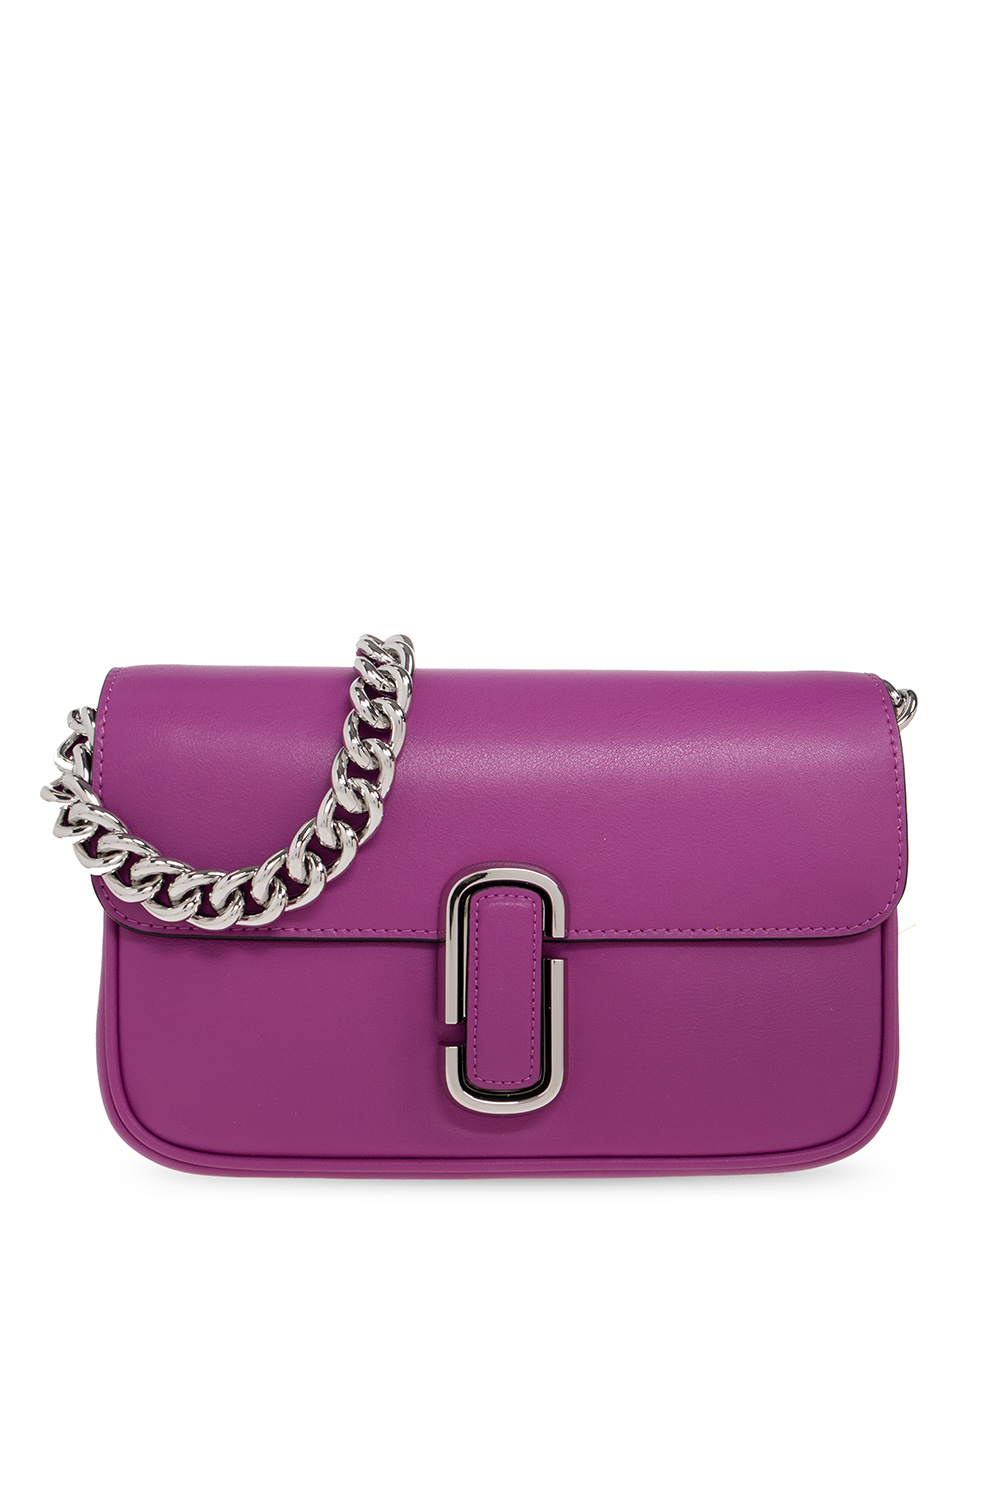 Marc Jacobs The Snapshot in Rose, Violet, & Silver w/ Detachable Strap - NWT